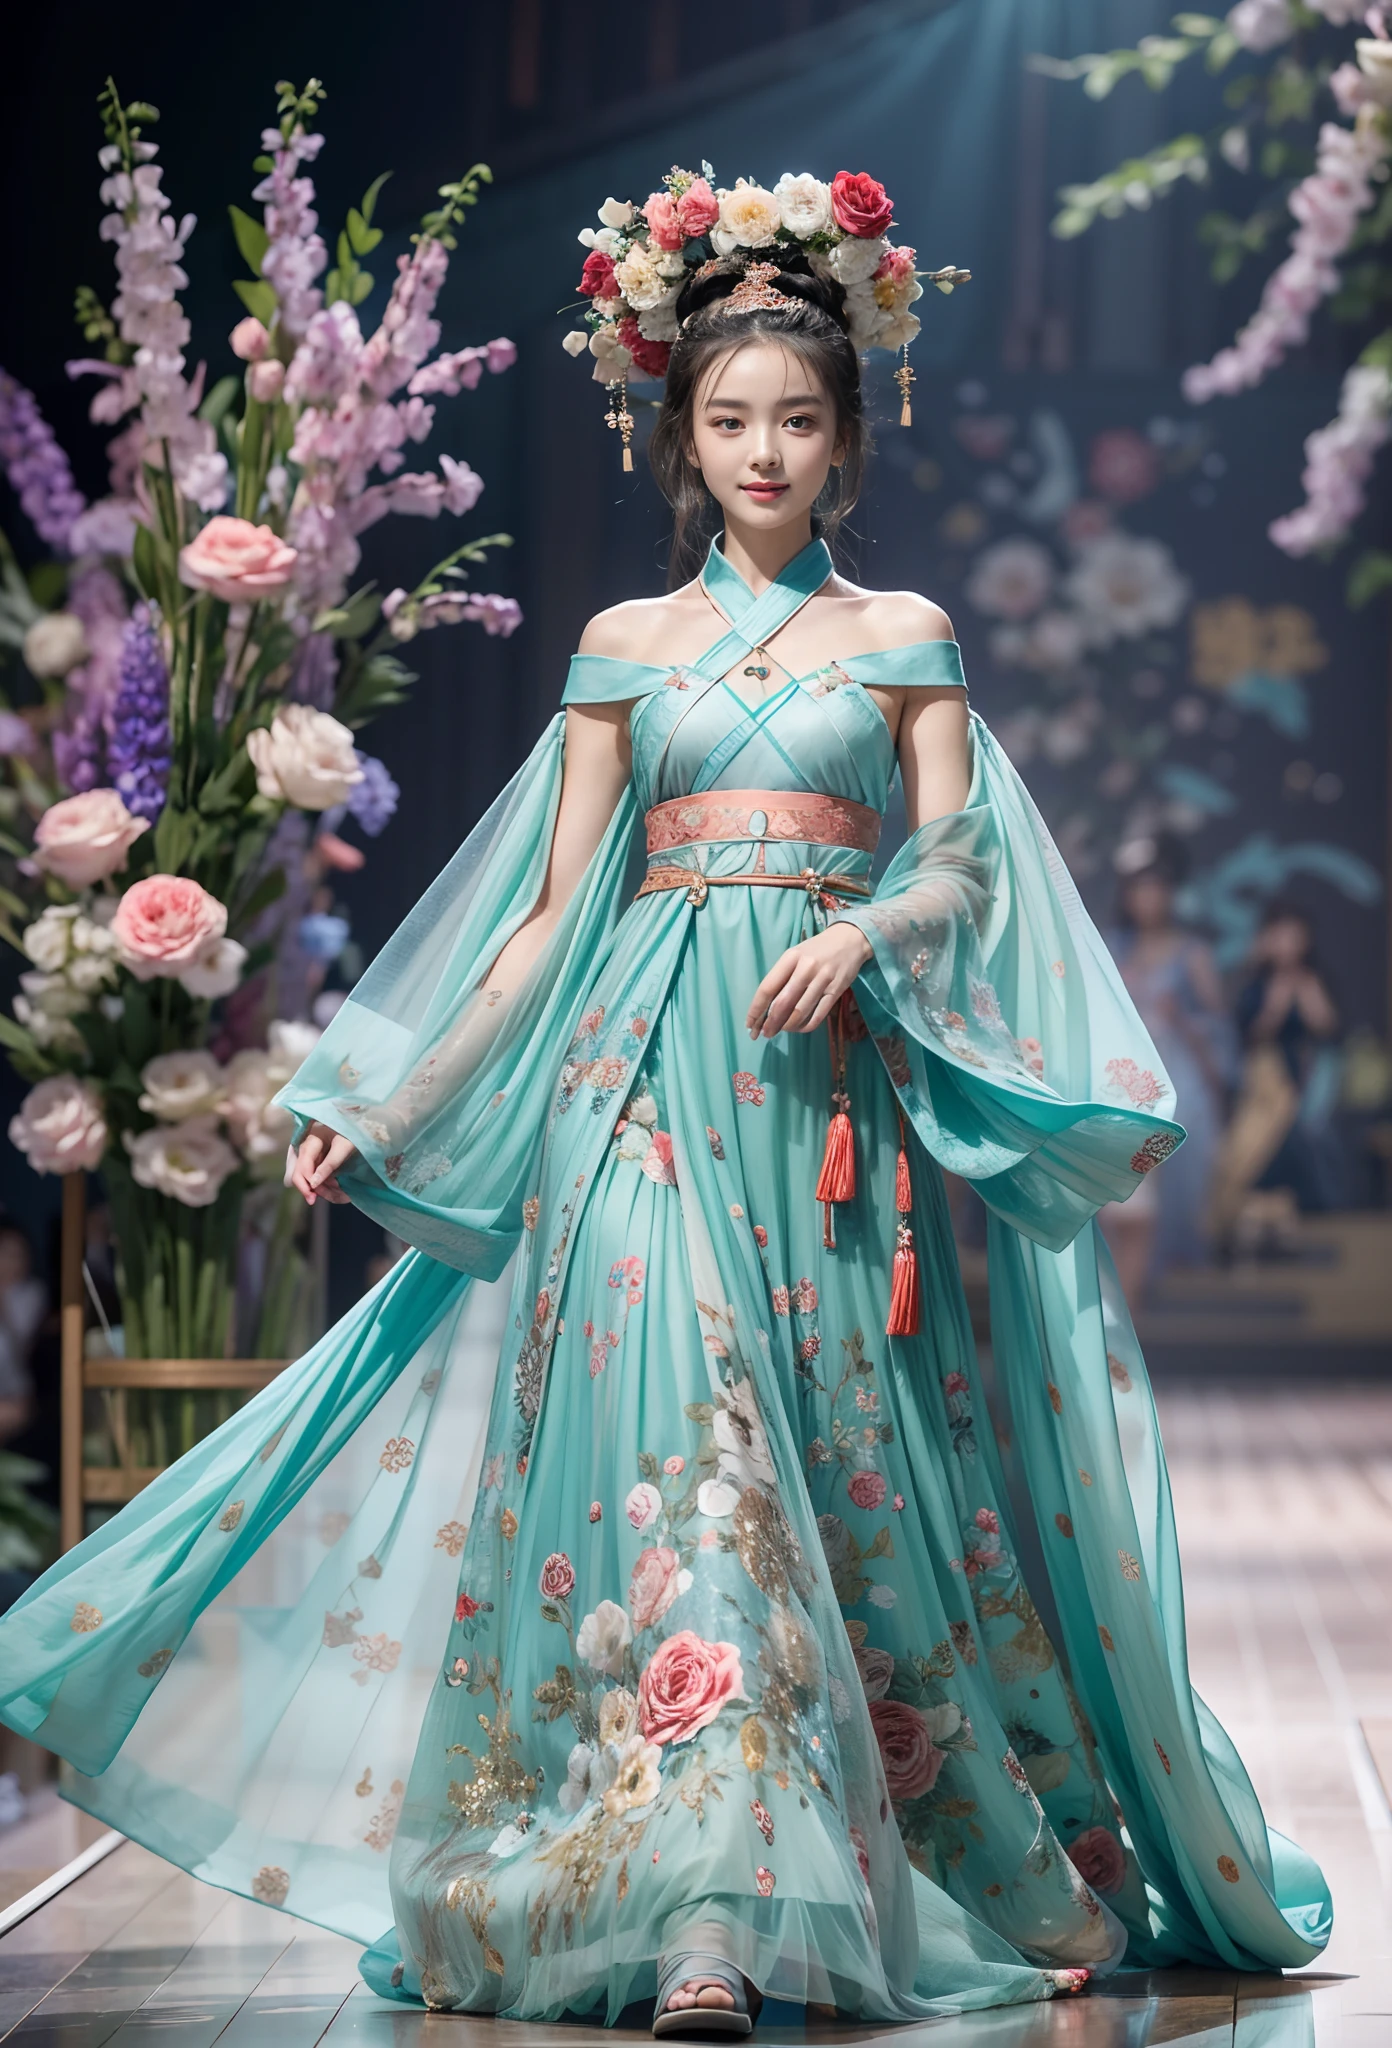 Beautiful model walking on the catwalk，Perform modeling steps。Wear Ming Dynasty Hanfu clothes，Rose long dress，Princess dress，Gorgeous vintage court style dress，Long skirt，maxiskirt，Large hem，The hem of the long skirt is close to the floor，The style is a Hanfu Fashion Week haute couture dress，Advanced customization，Private customization，Fashion show model，Big show，There are tulle jewelry on the skirt。A necklace is worn around his neck，short detailed hair，Hair coiled up，Headwear，largeeyes，Very beautiful and moving，((There was only one female model walking on the catwalk))，Men and women make up a large portion，The catwalk was covered with flowers，The background is covered with flowers，The female model had a smile on her face，standing on your feet，The posture is elegant and dignified，Realistic photo images，8K, hyper HD, Masterpiece, ccurate, Textured skin, High details, Best quality, Award-Awarded，Long-range shooting，Sense of distance